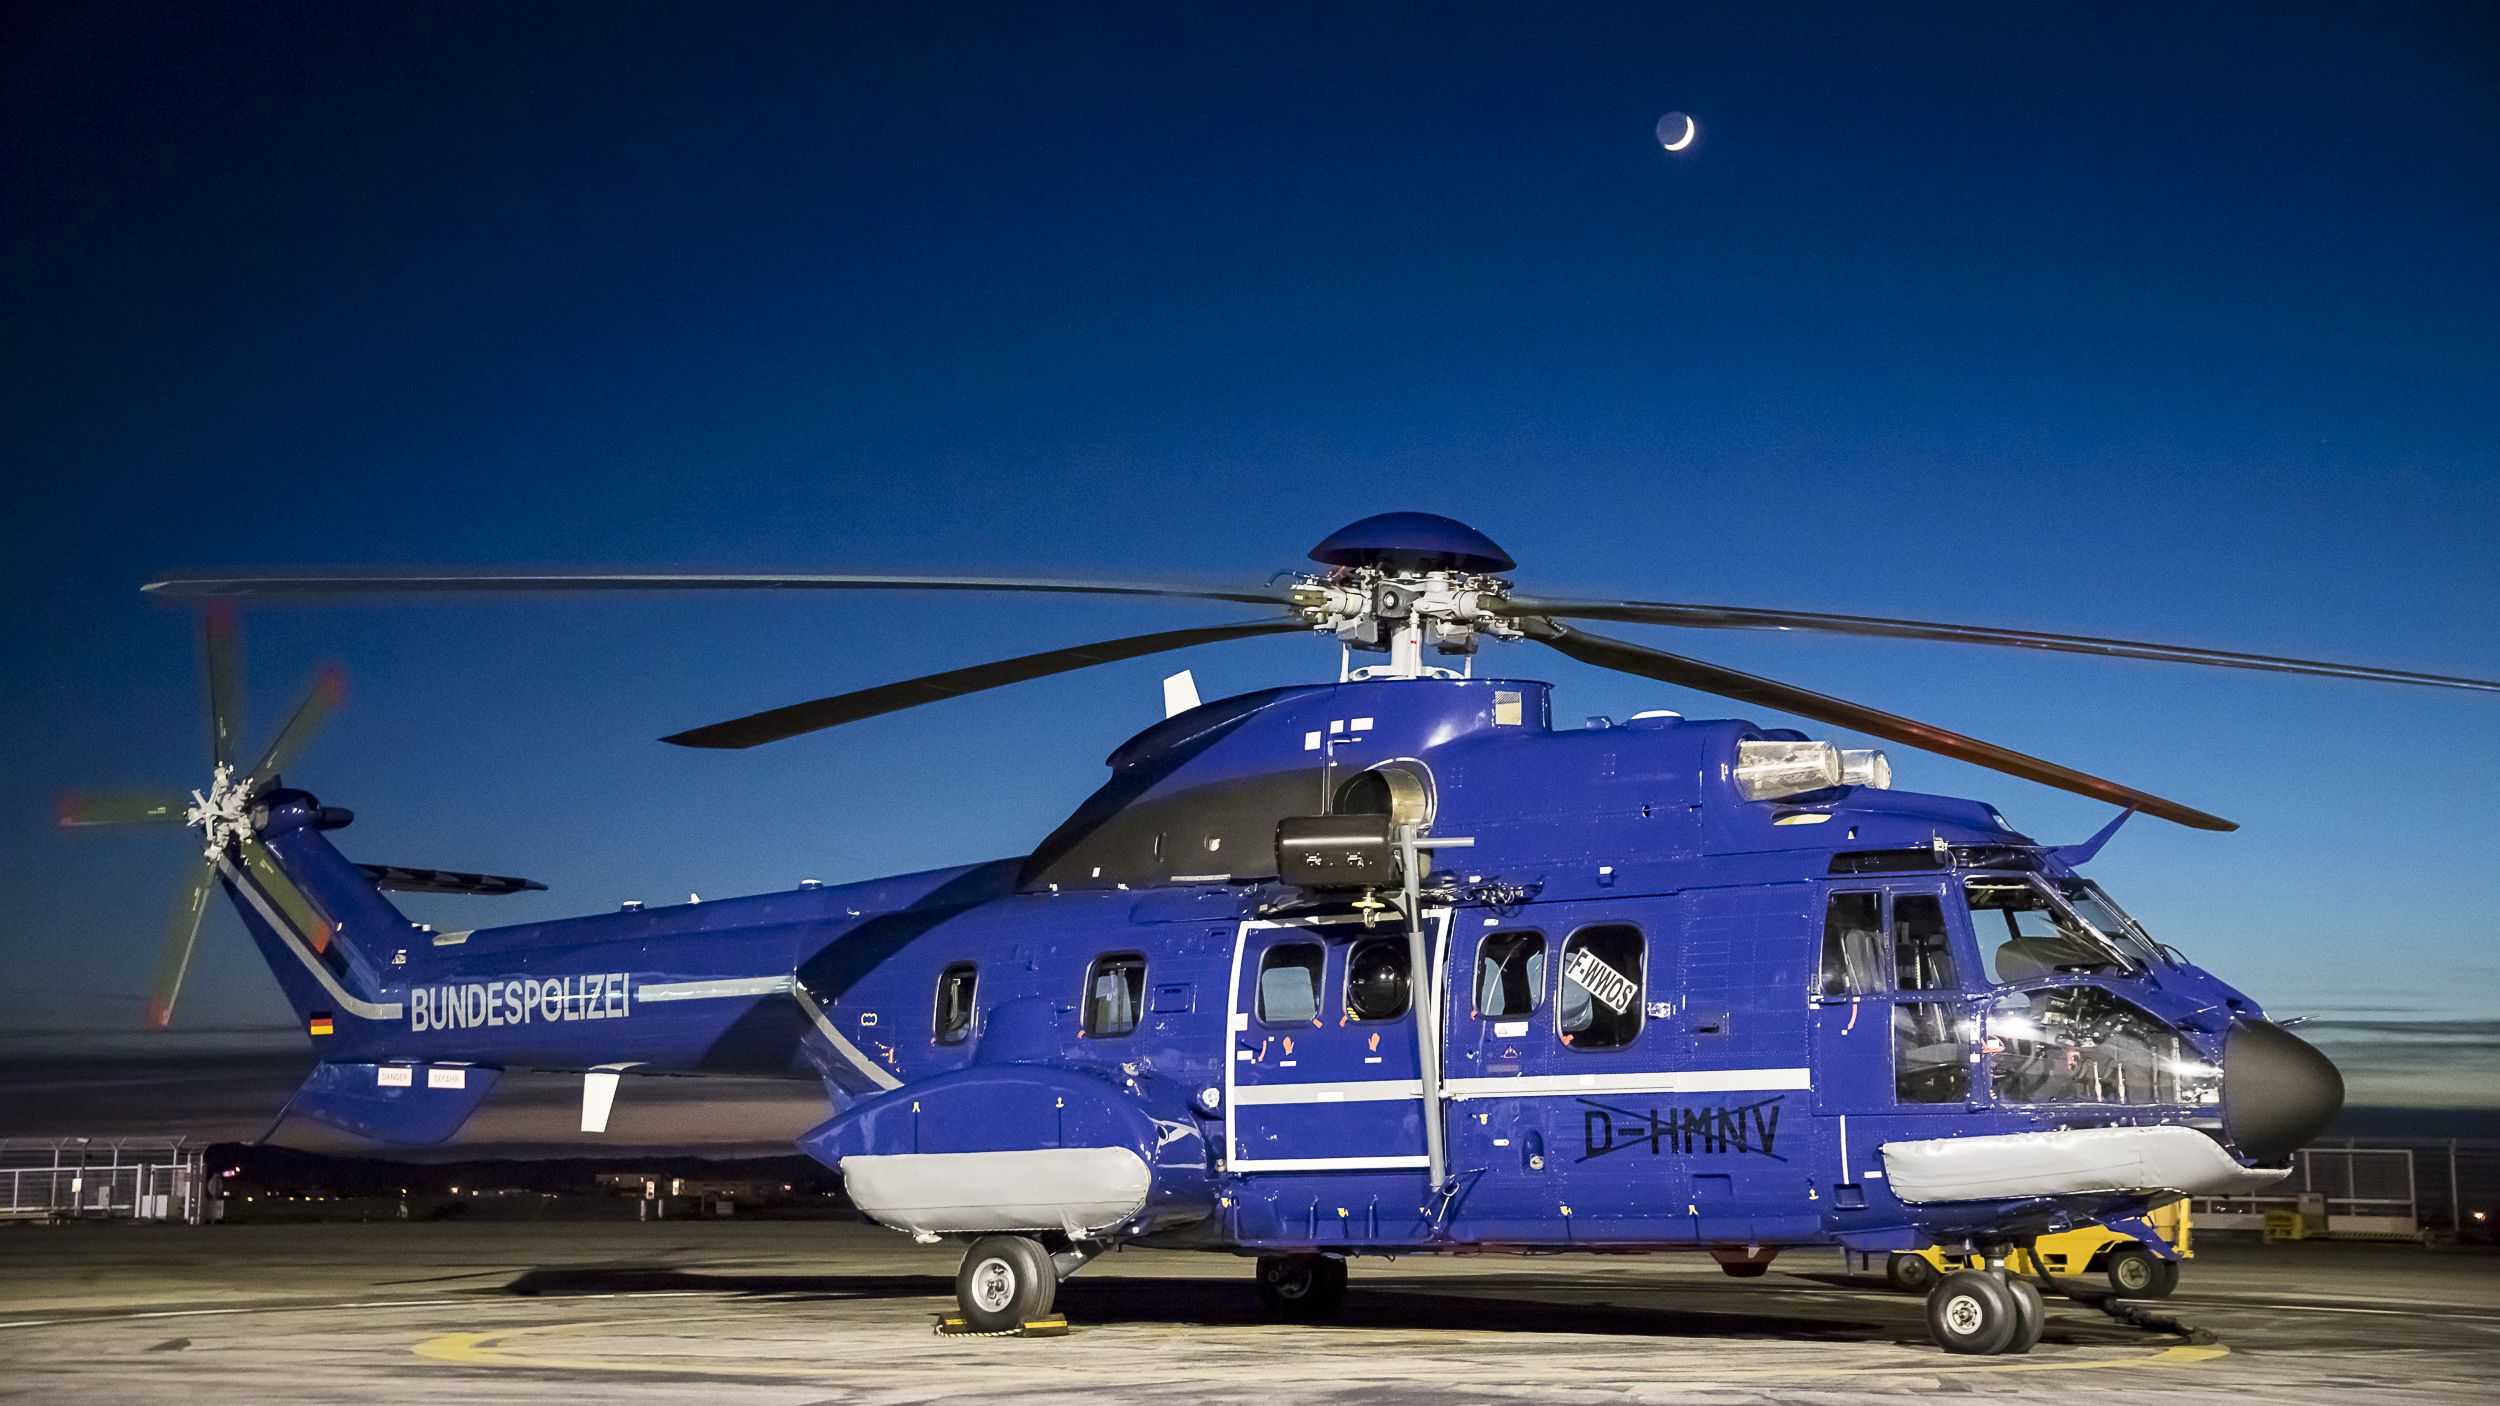 The Bundespolizei (German Federal Police) has taken delivery of three heavy H215 helicopters, with a fourth to follow in June 2019. The twin-engine multi-role Super Pumas will enter operation at the beginning of 2020 supporting the Central Command for Maritime Emergencies (CCME), which oversees maritime missions off of Germany’s coast. Click to enlarge.